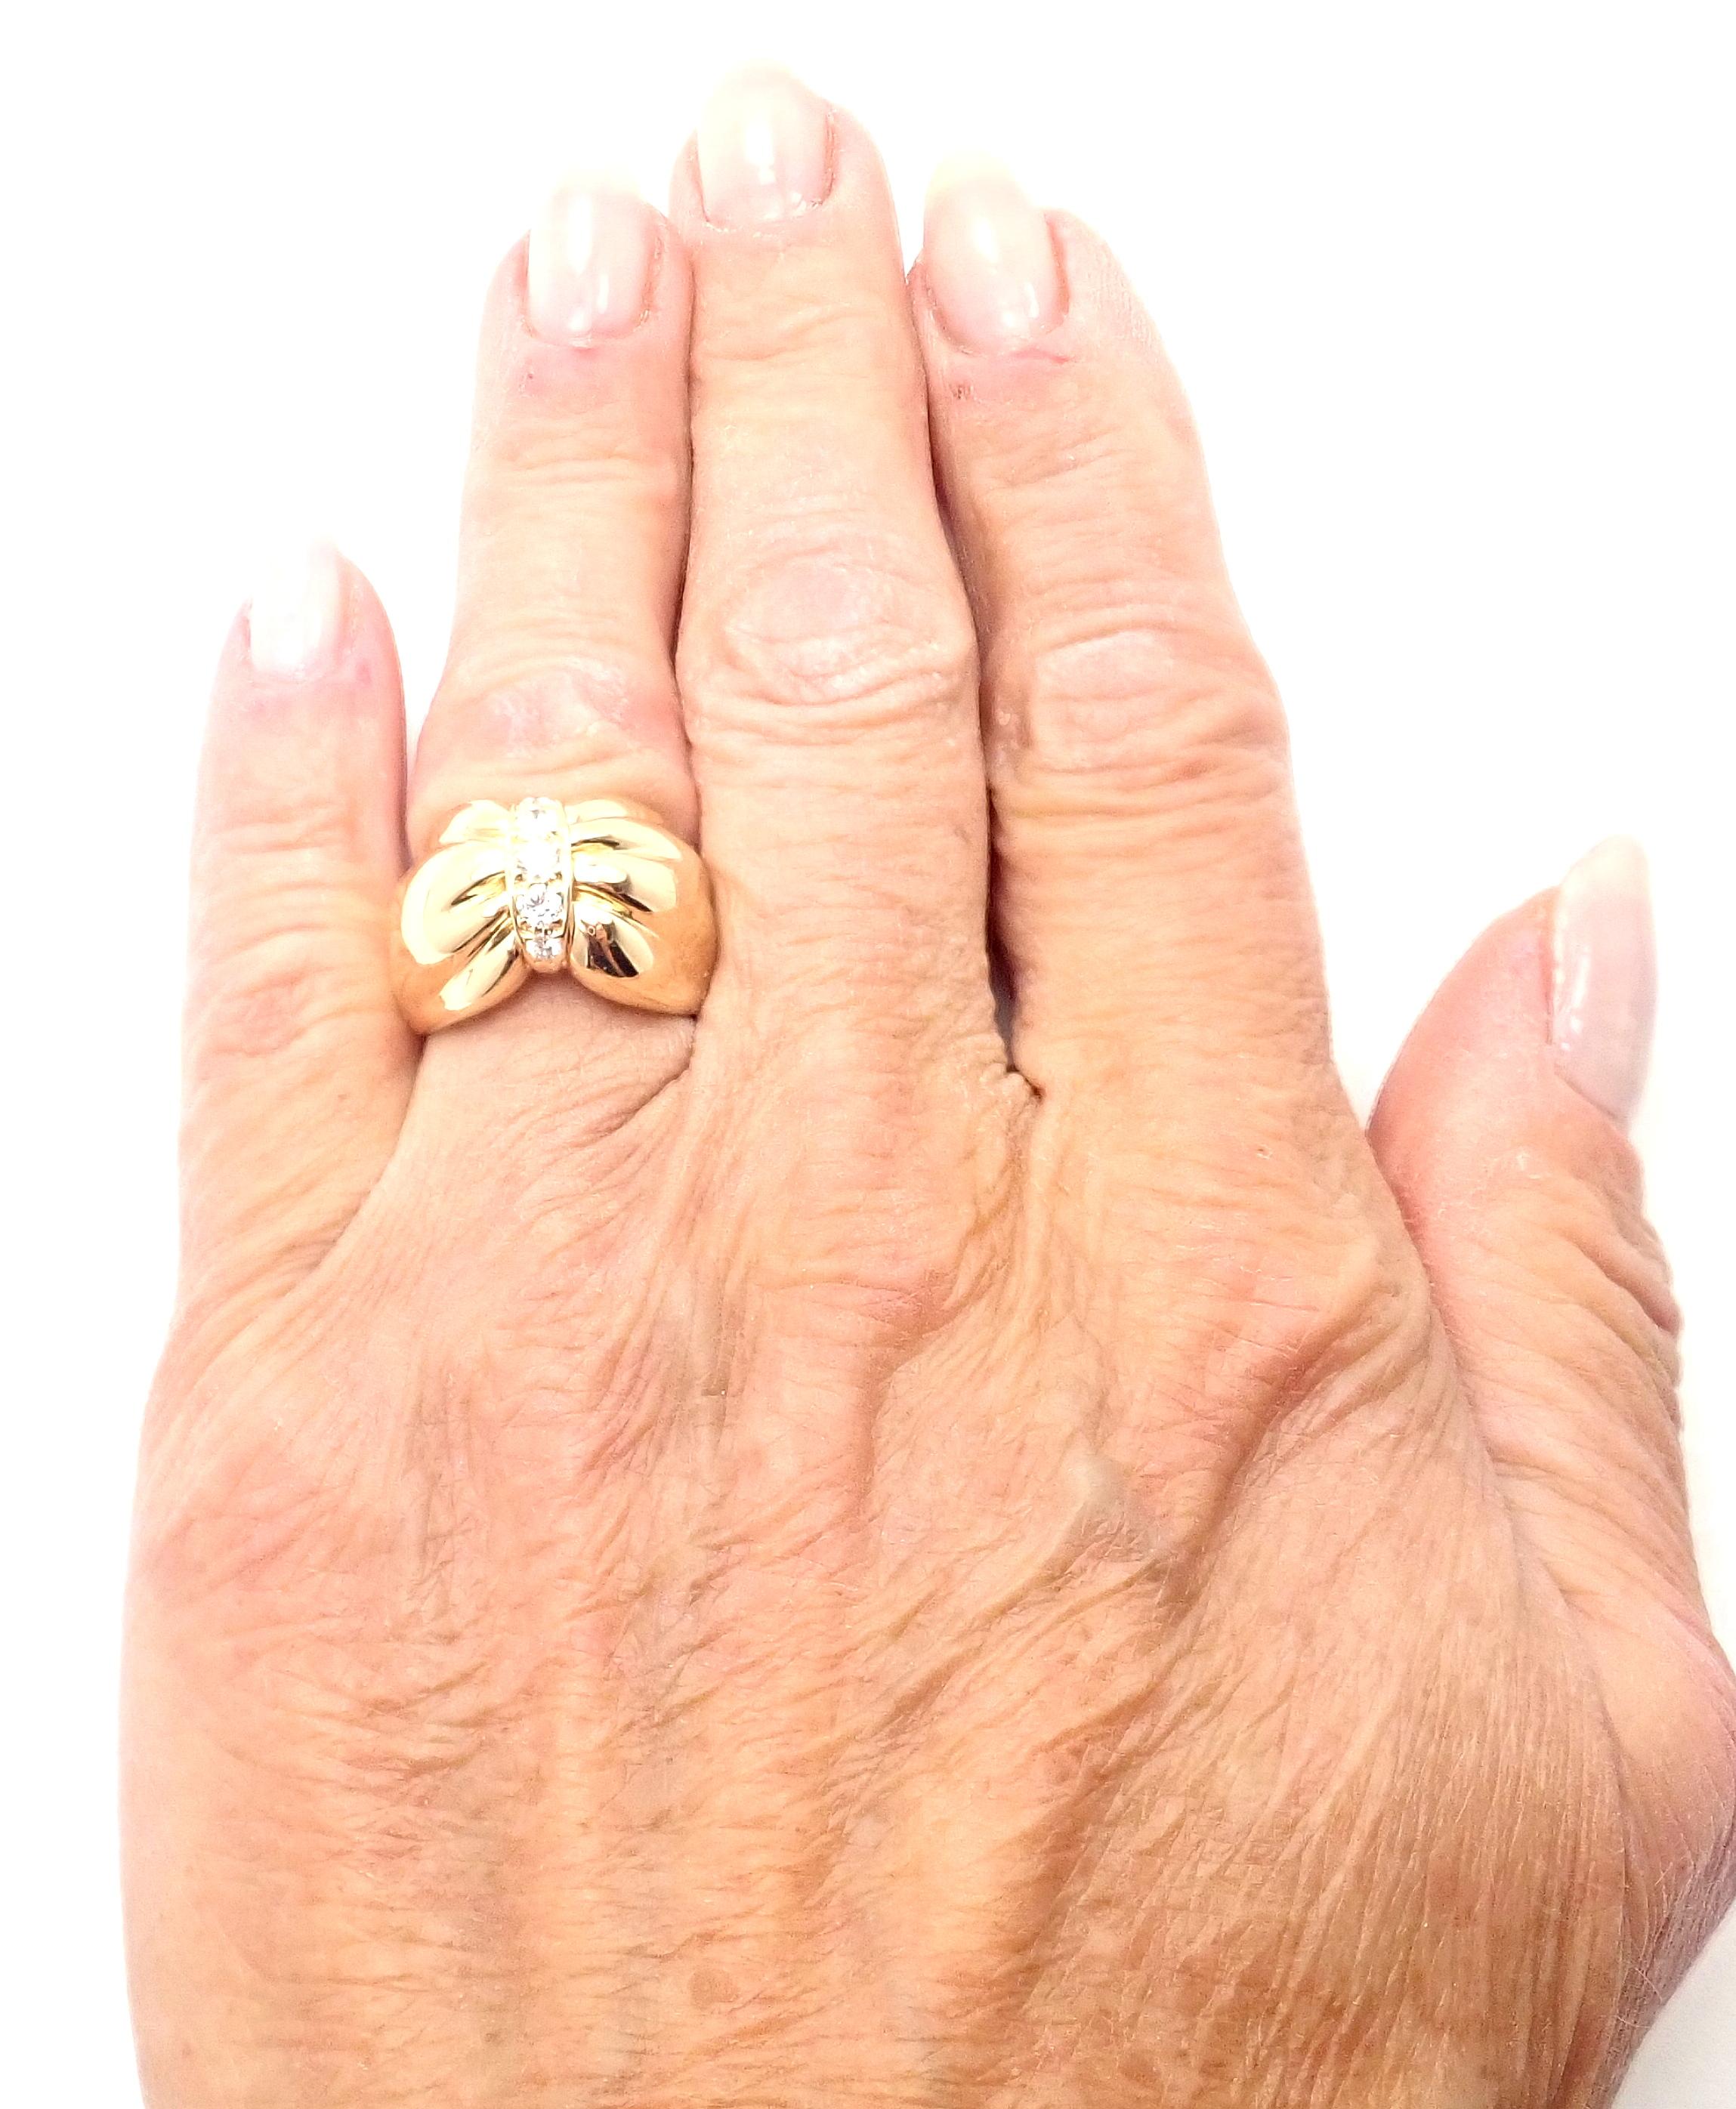 Van Cleef & Arpels Diamond Bow Design Yellow Gold Band Ring In Excellent Condition For Sale In Holland, PA